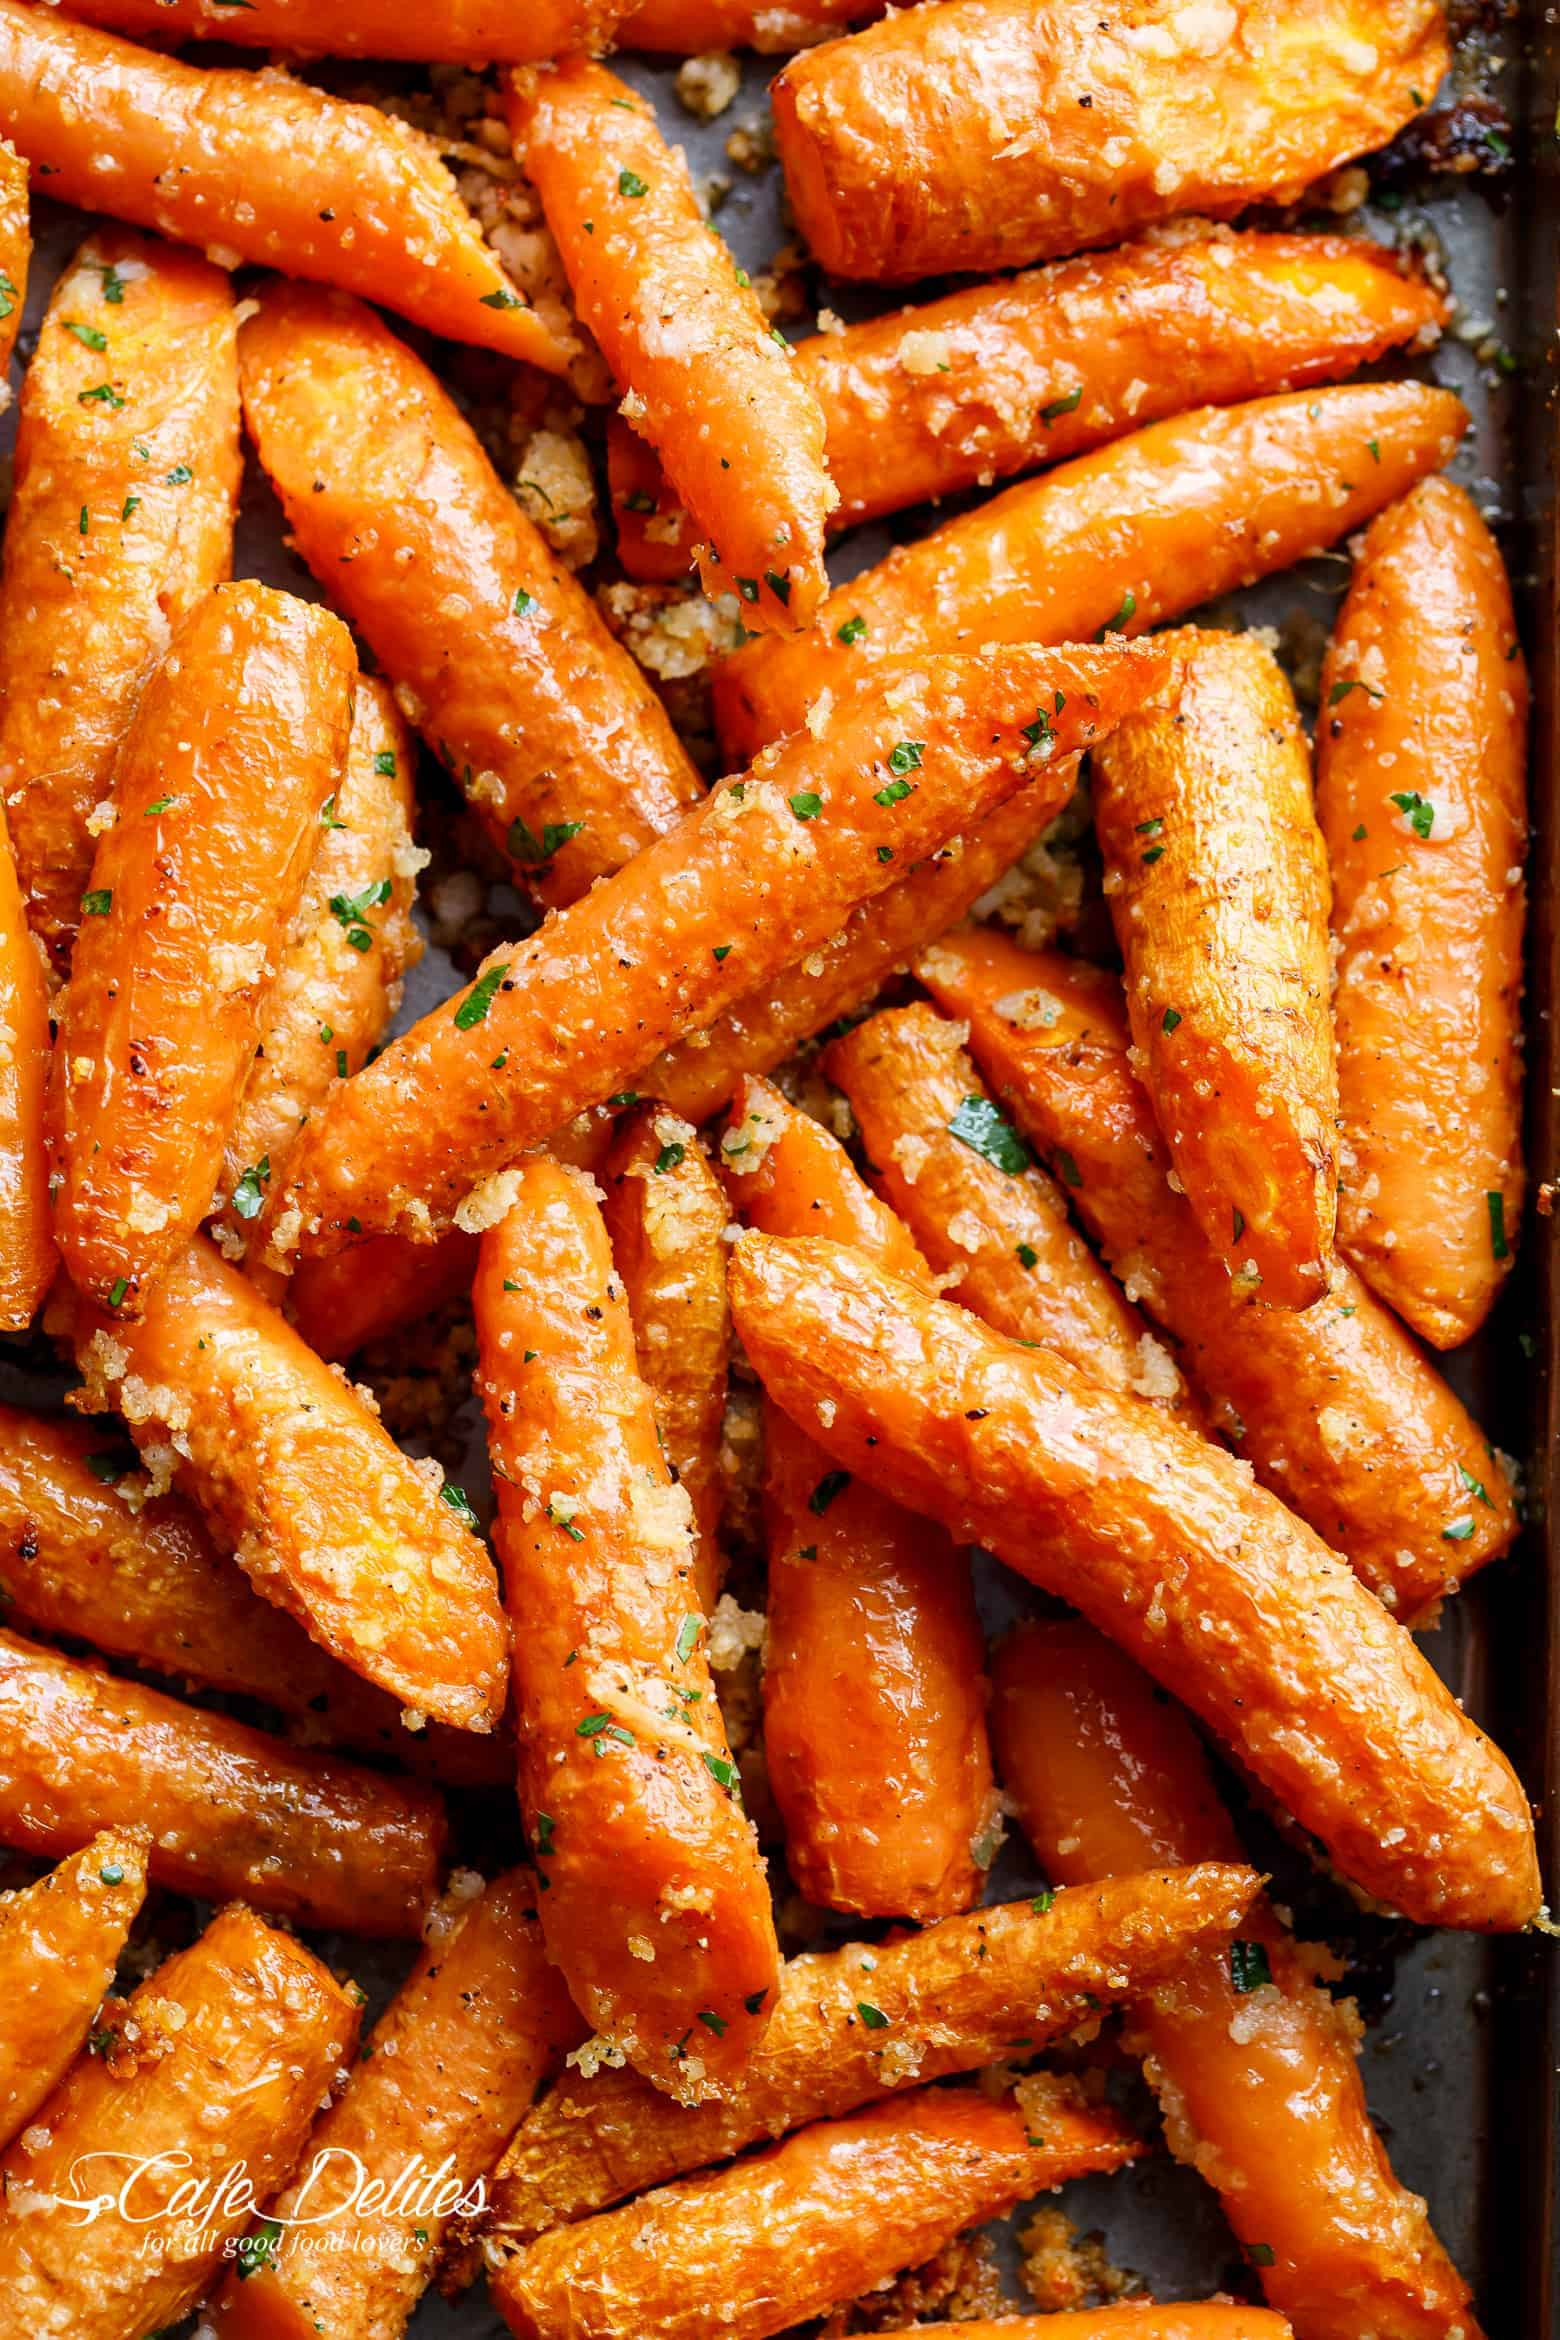 Roasted Baby Carrot Recipes
 Parmesan Roasted Carrots Recipe Cafe Delites